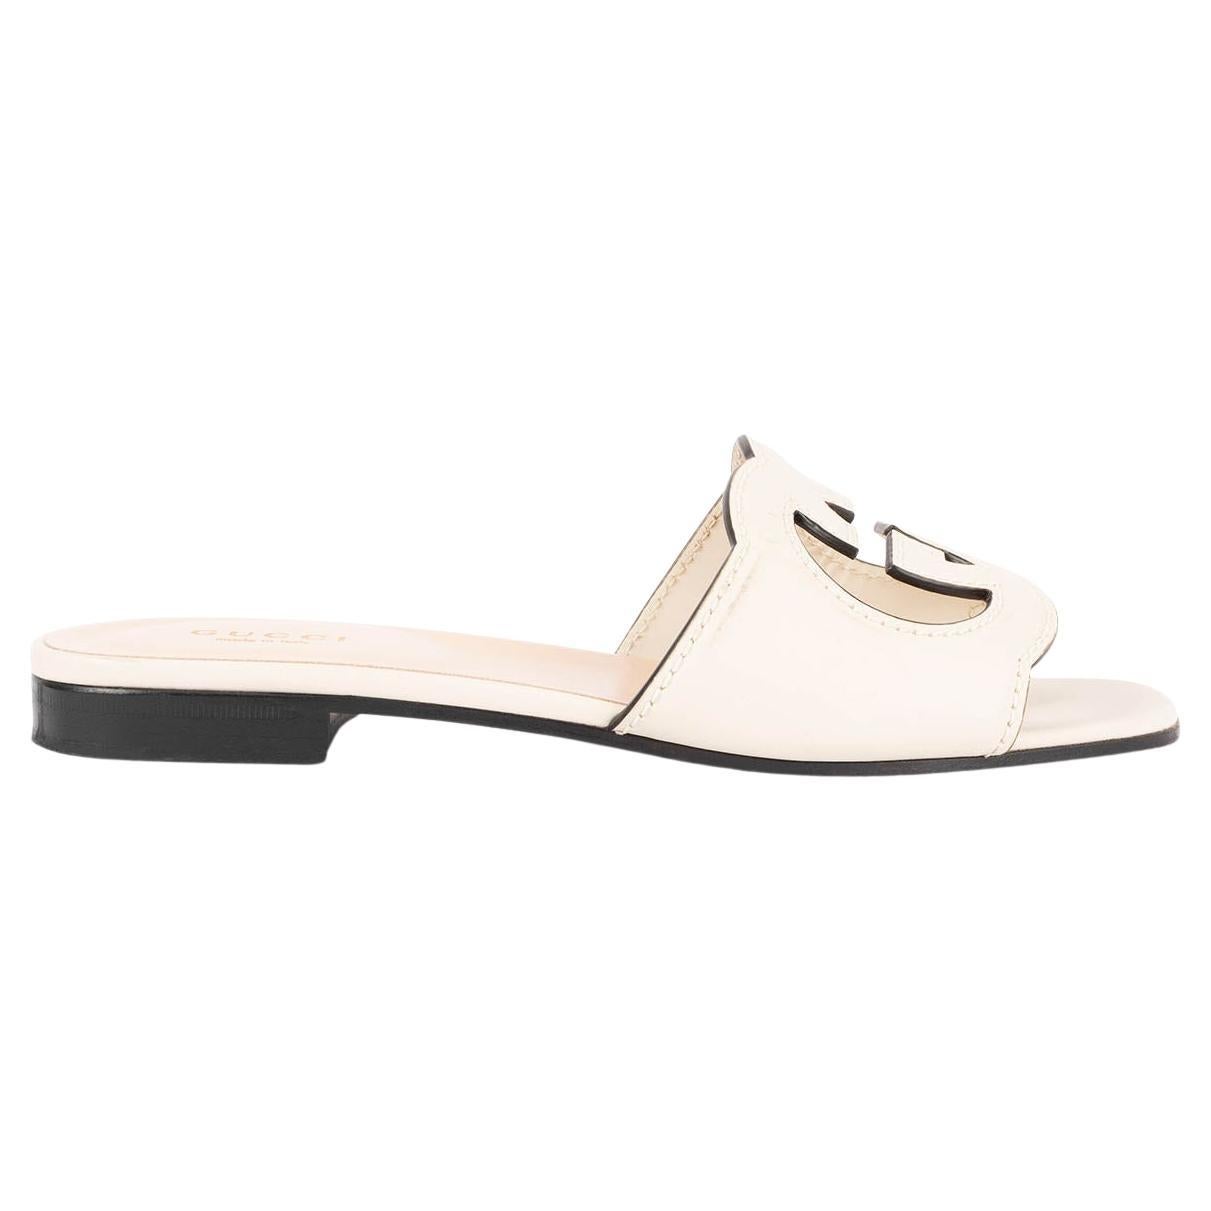 GUCCI cream leather INTERLOCKING G CUT-OUT SLIDE Sandals Shoes 35